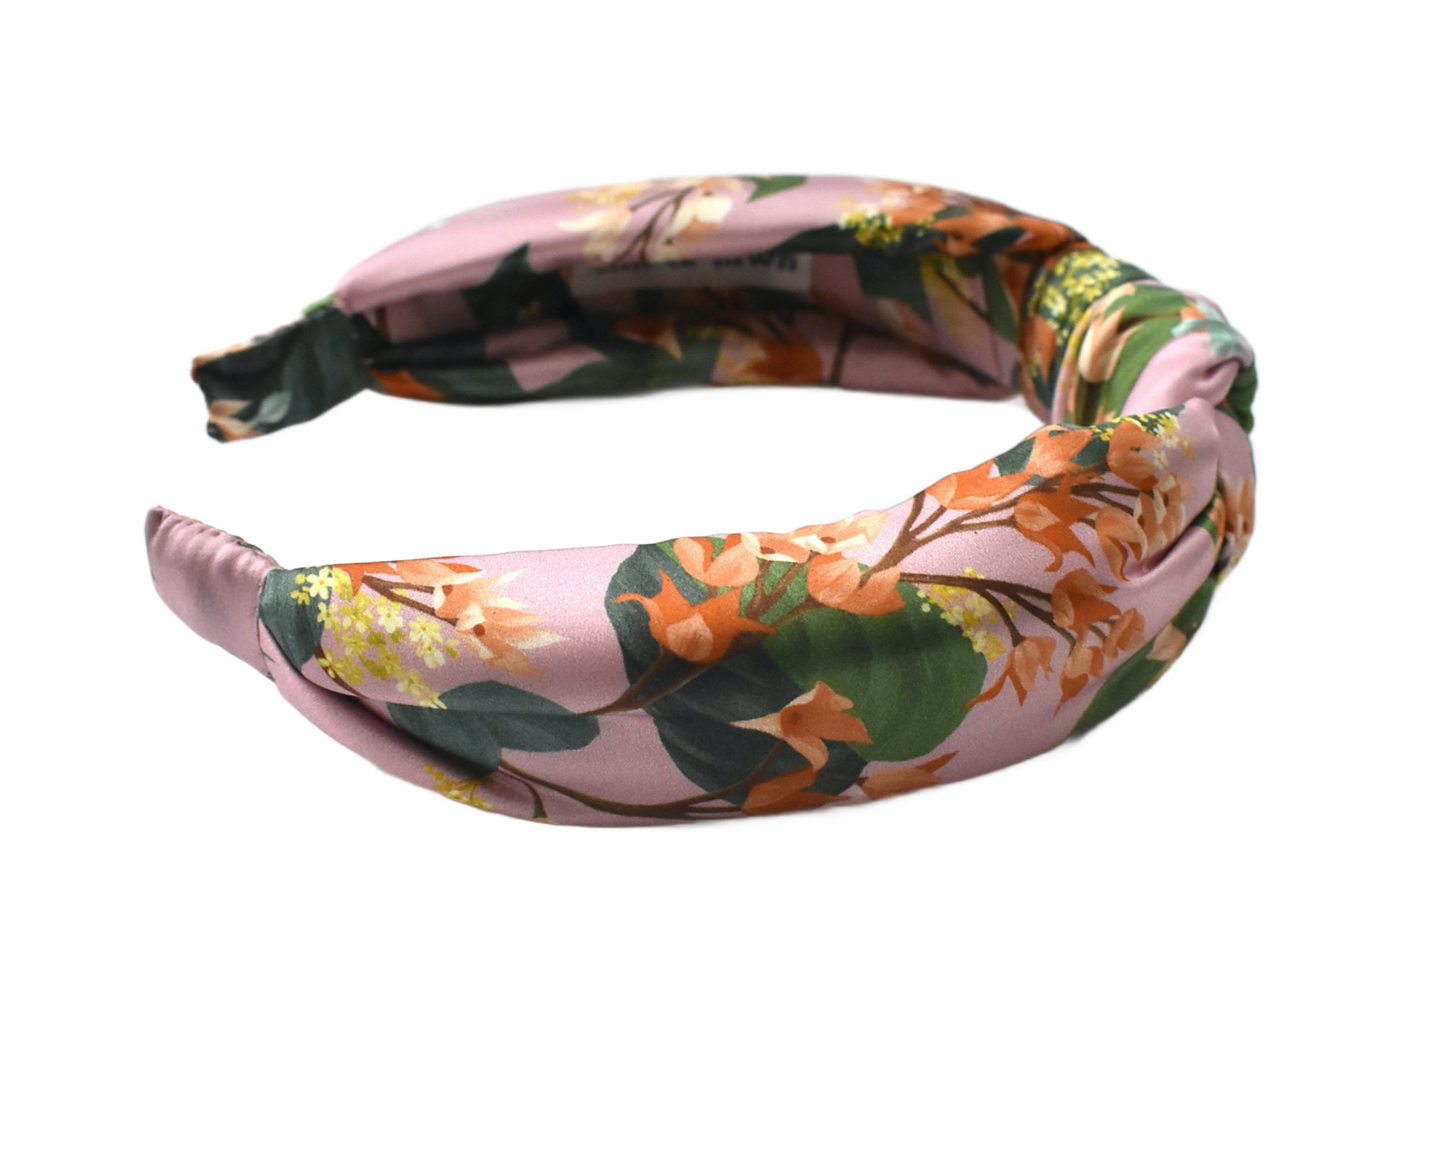 Luxury Silk Knot Alice band - Liberty of London Pink Osterley Floral 100% Silk-Satin